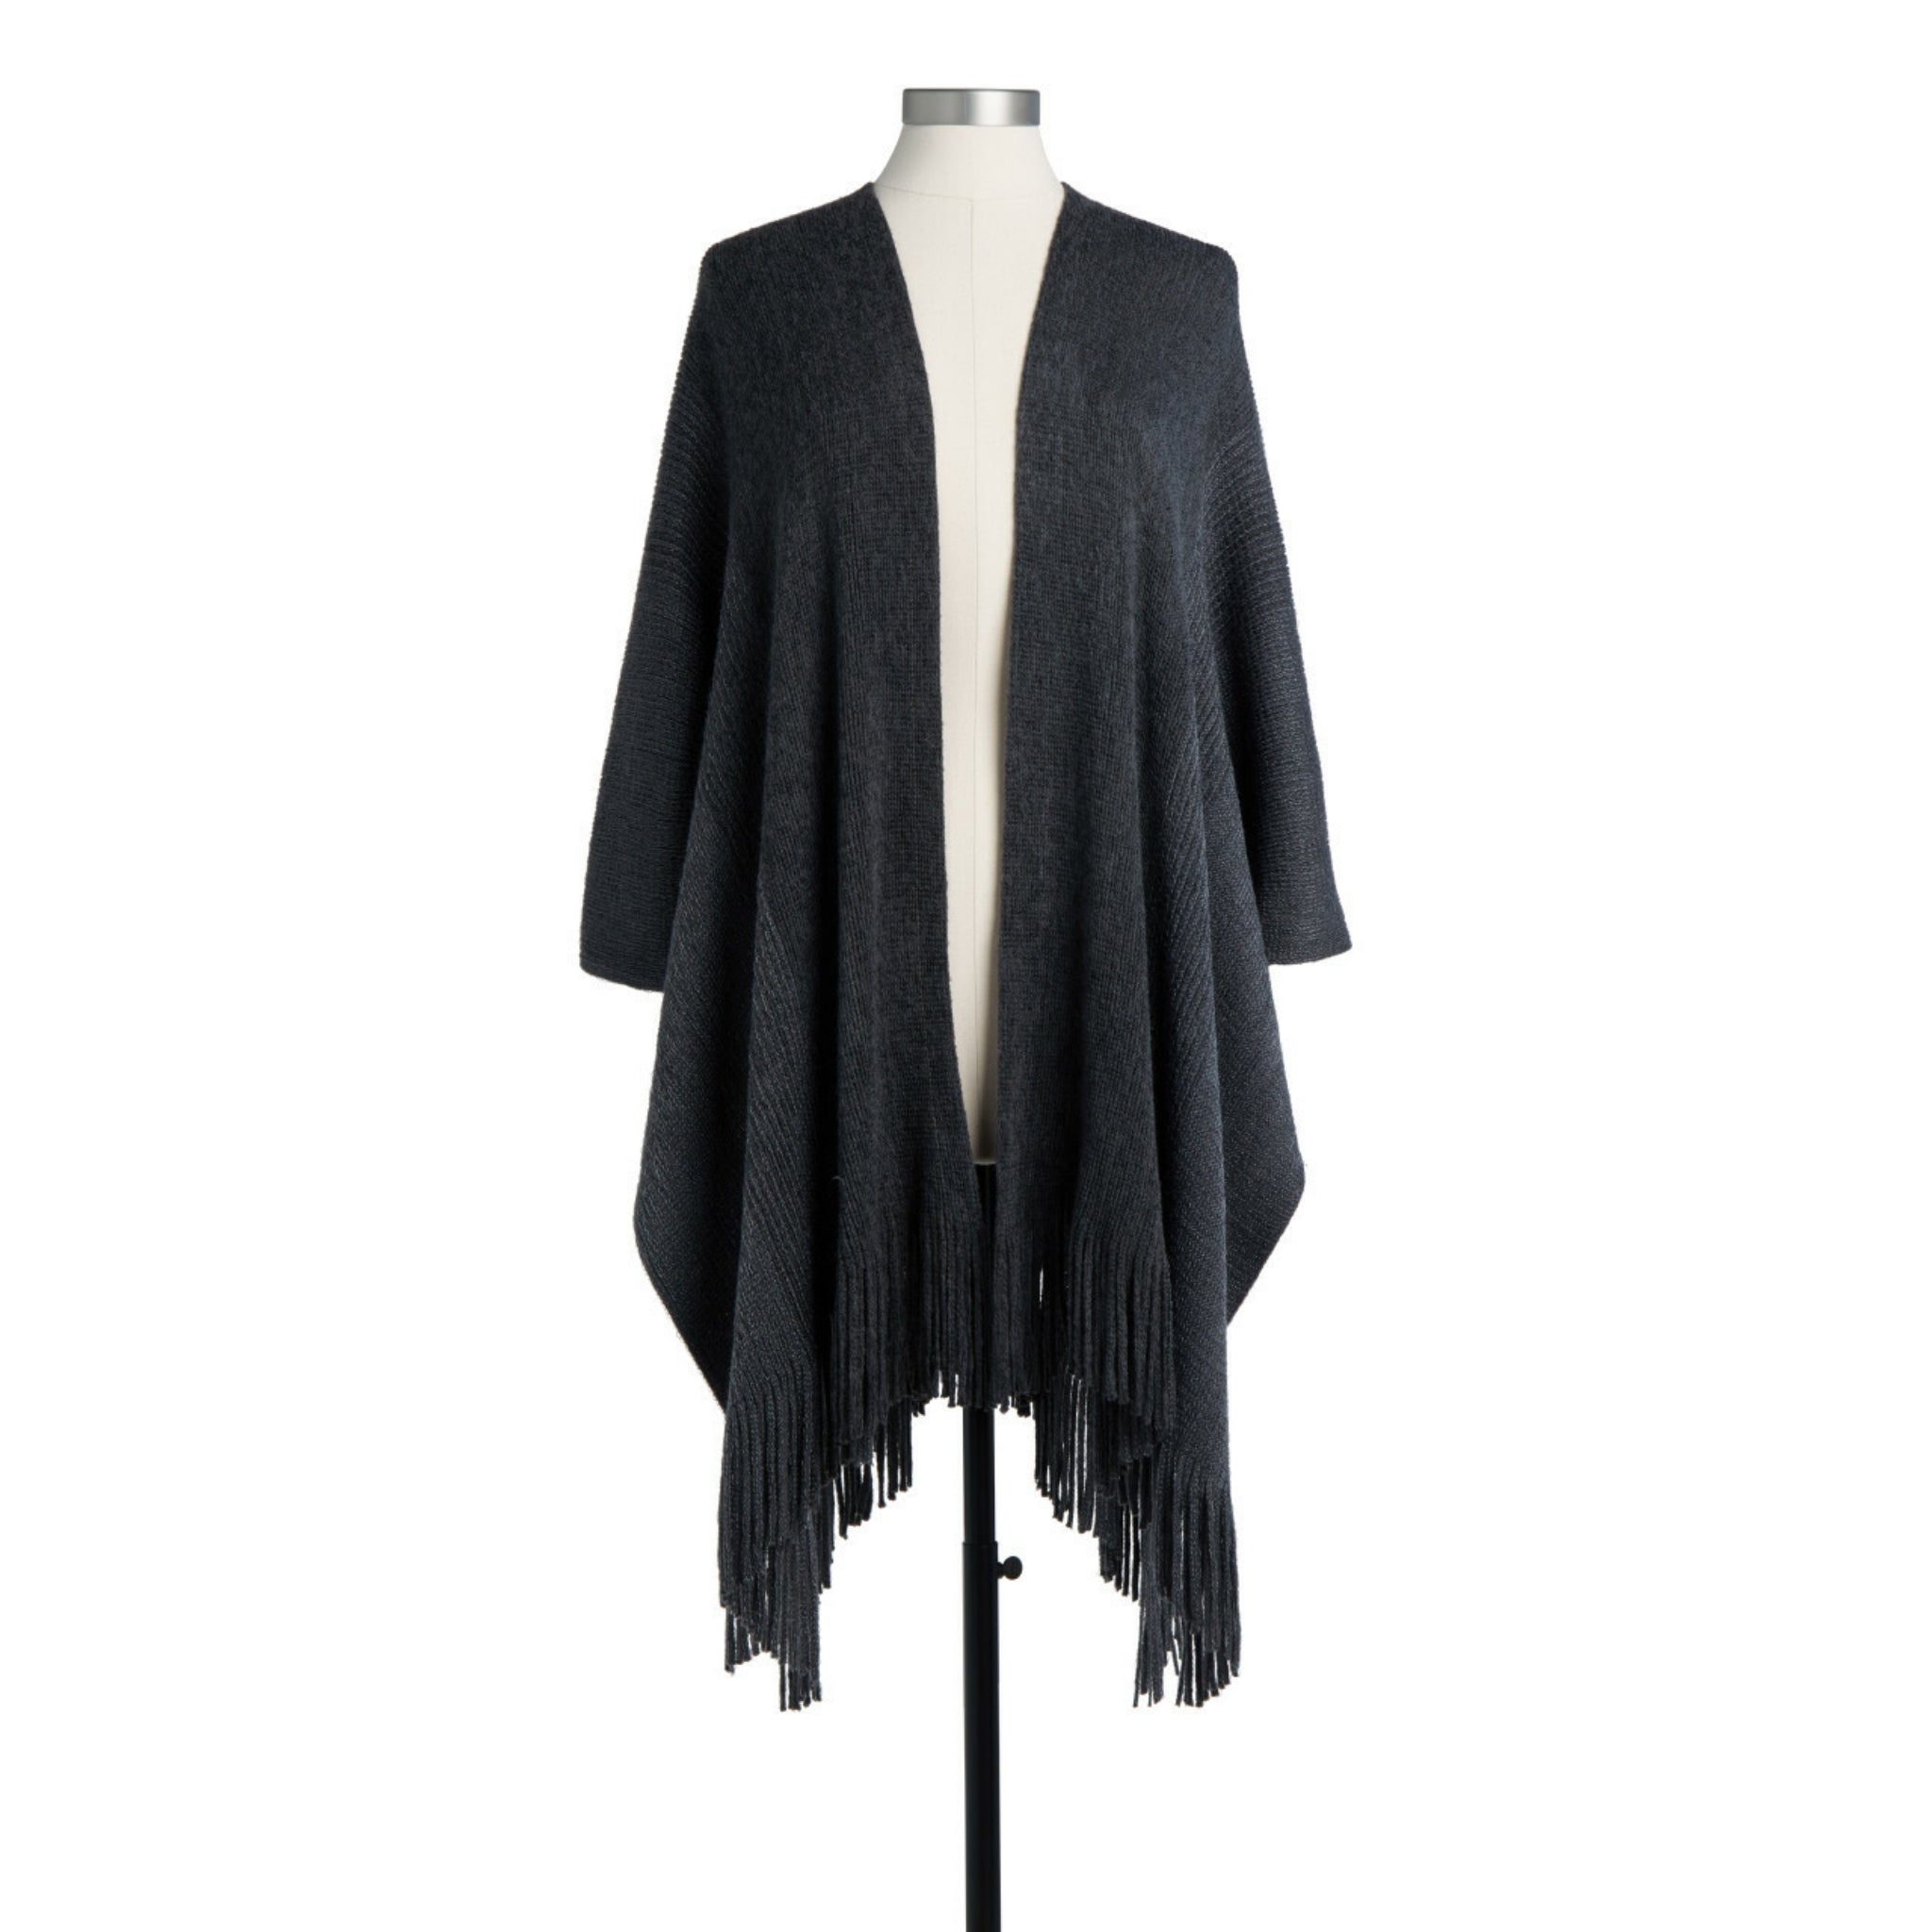 knit duster with fringe - black/charcoal